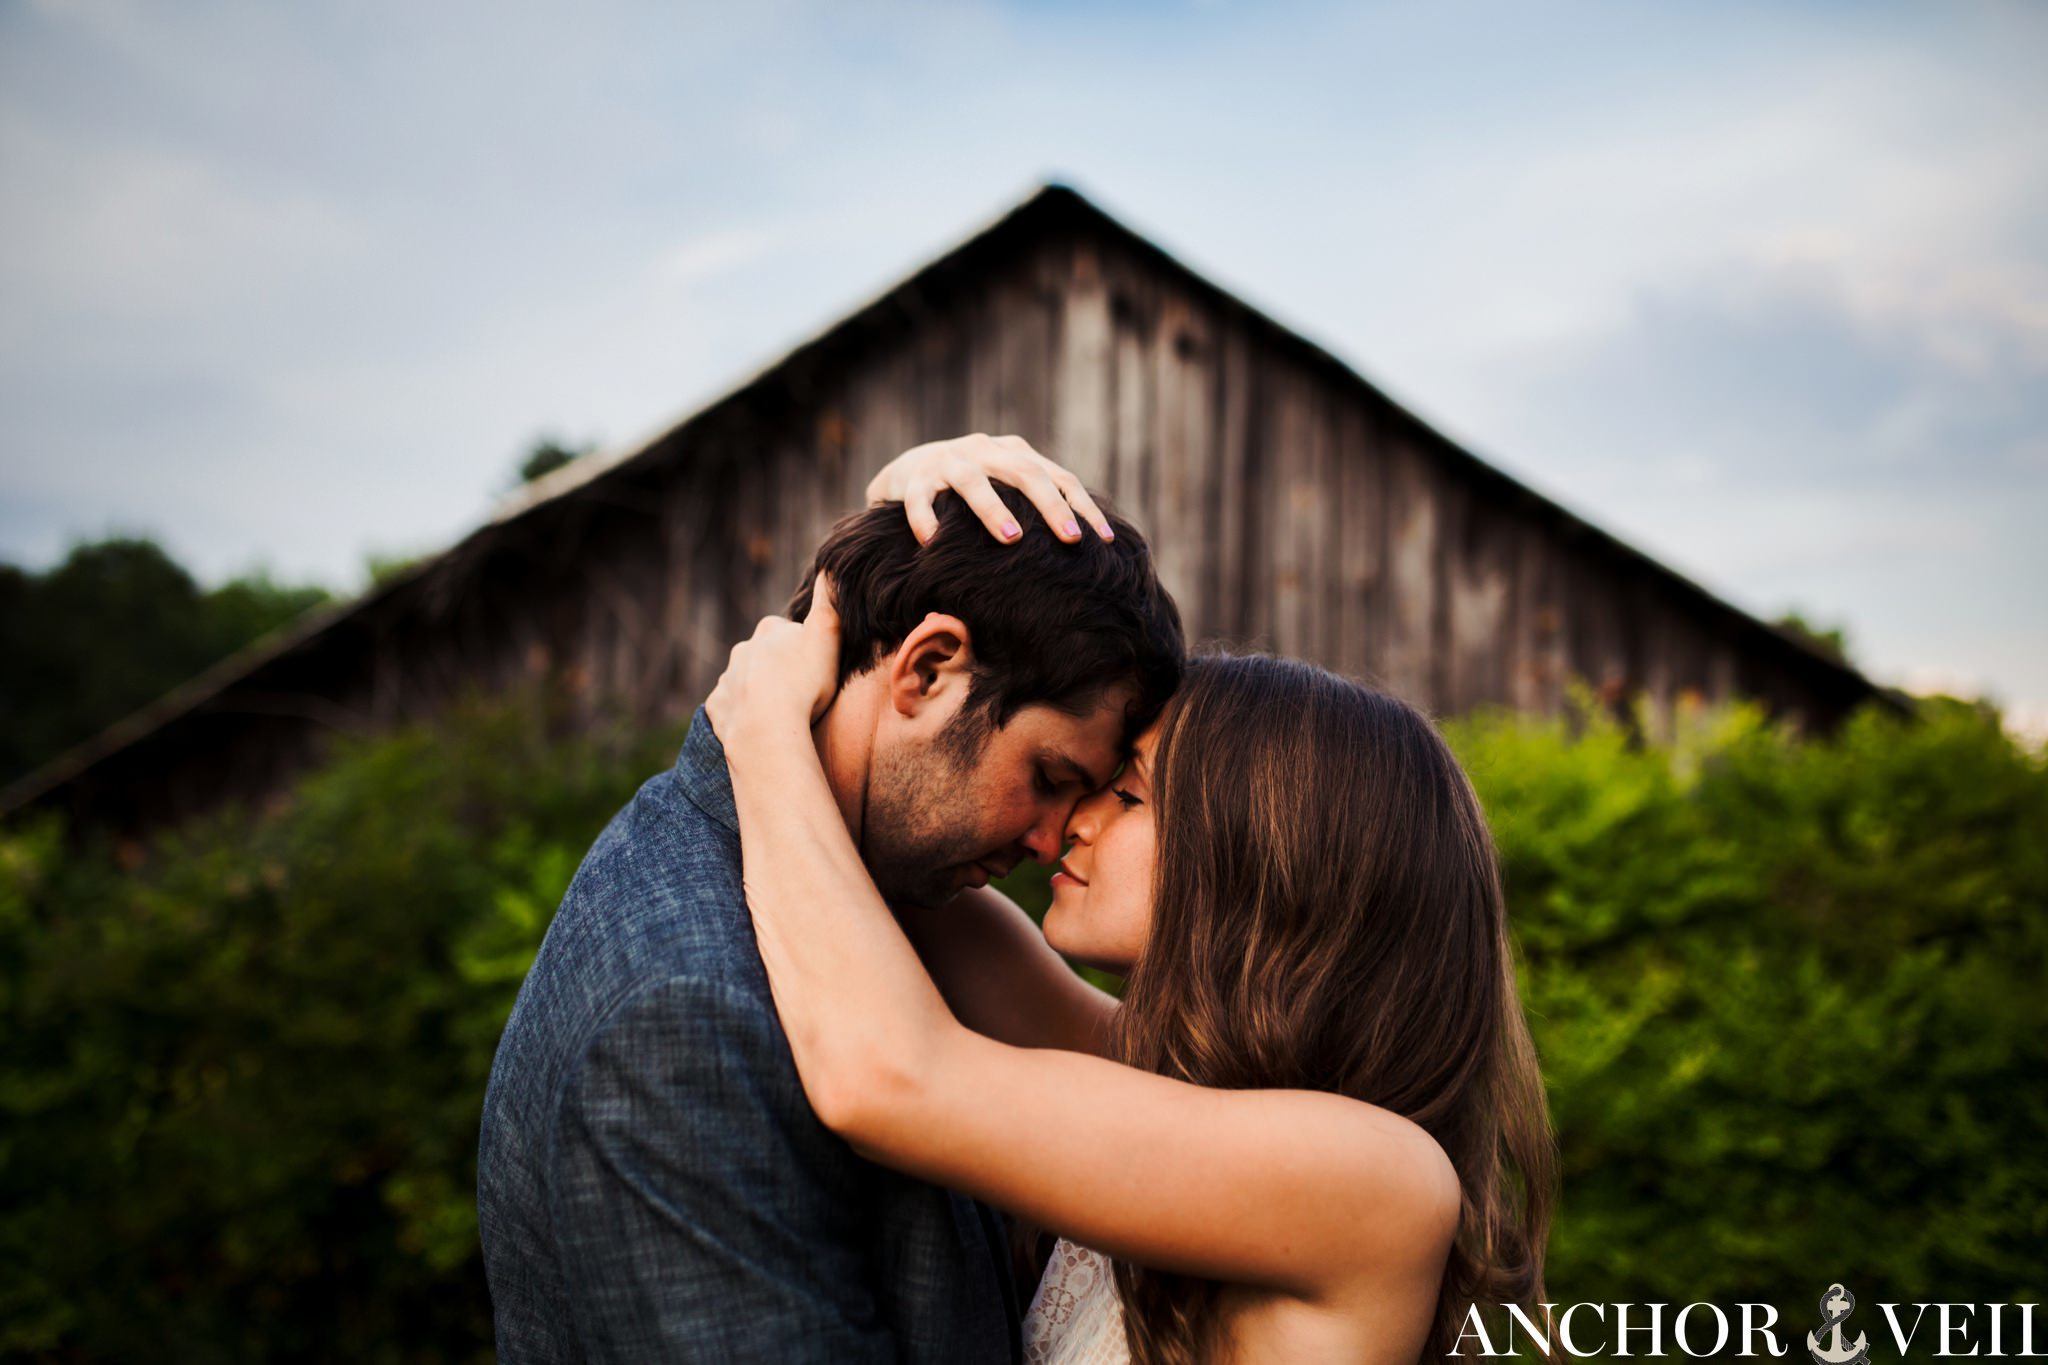 the barn with angles looks awesome as she holds him